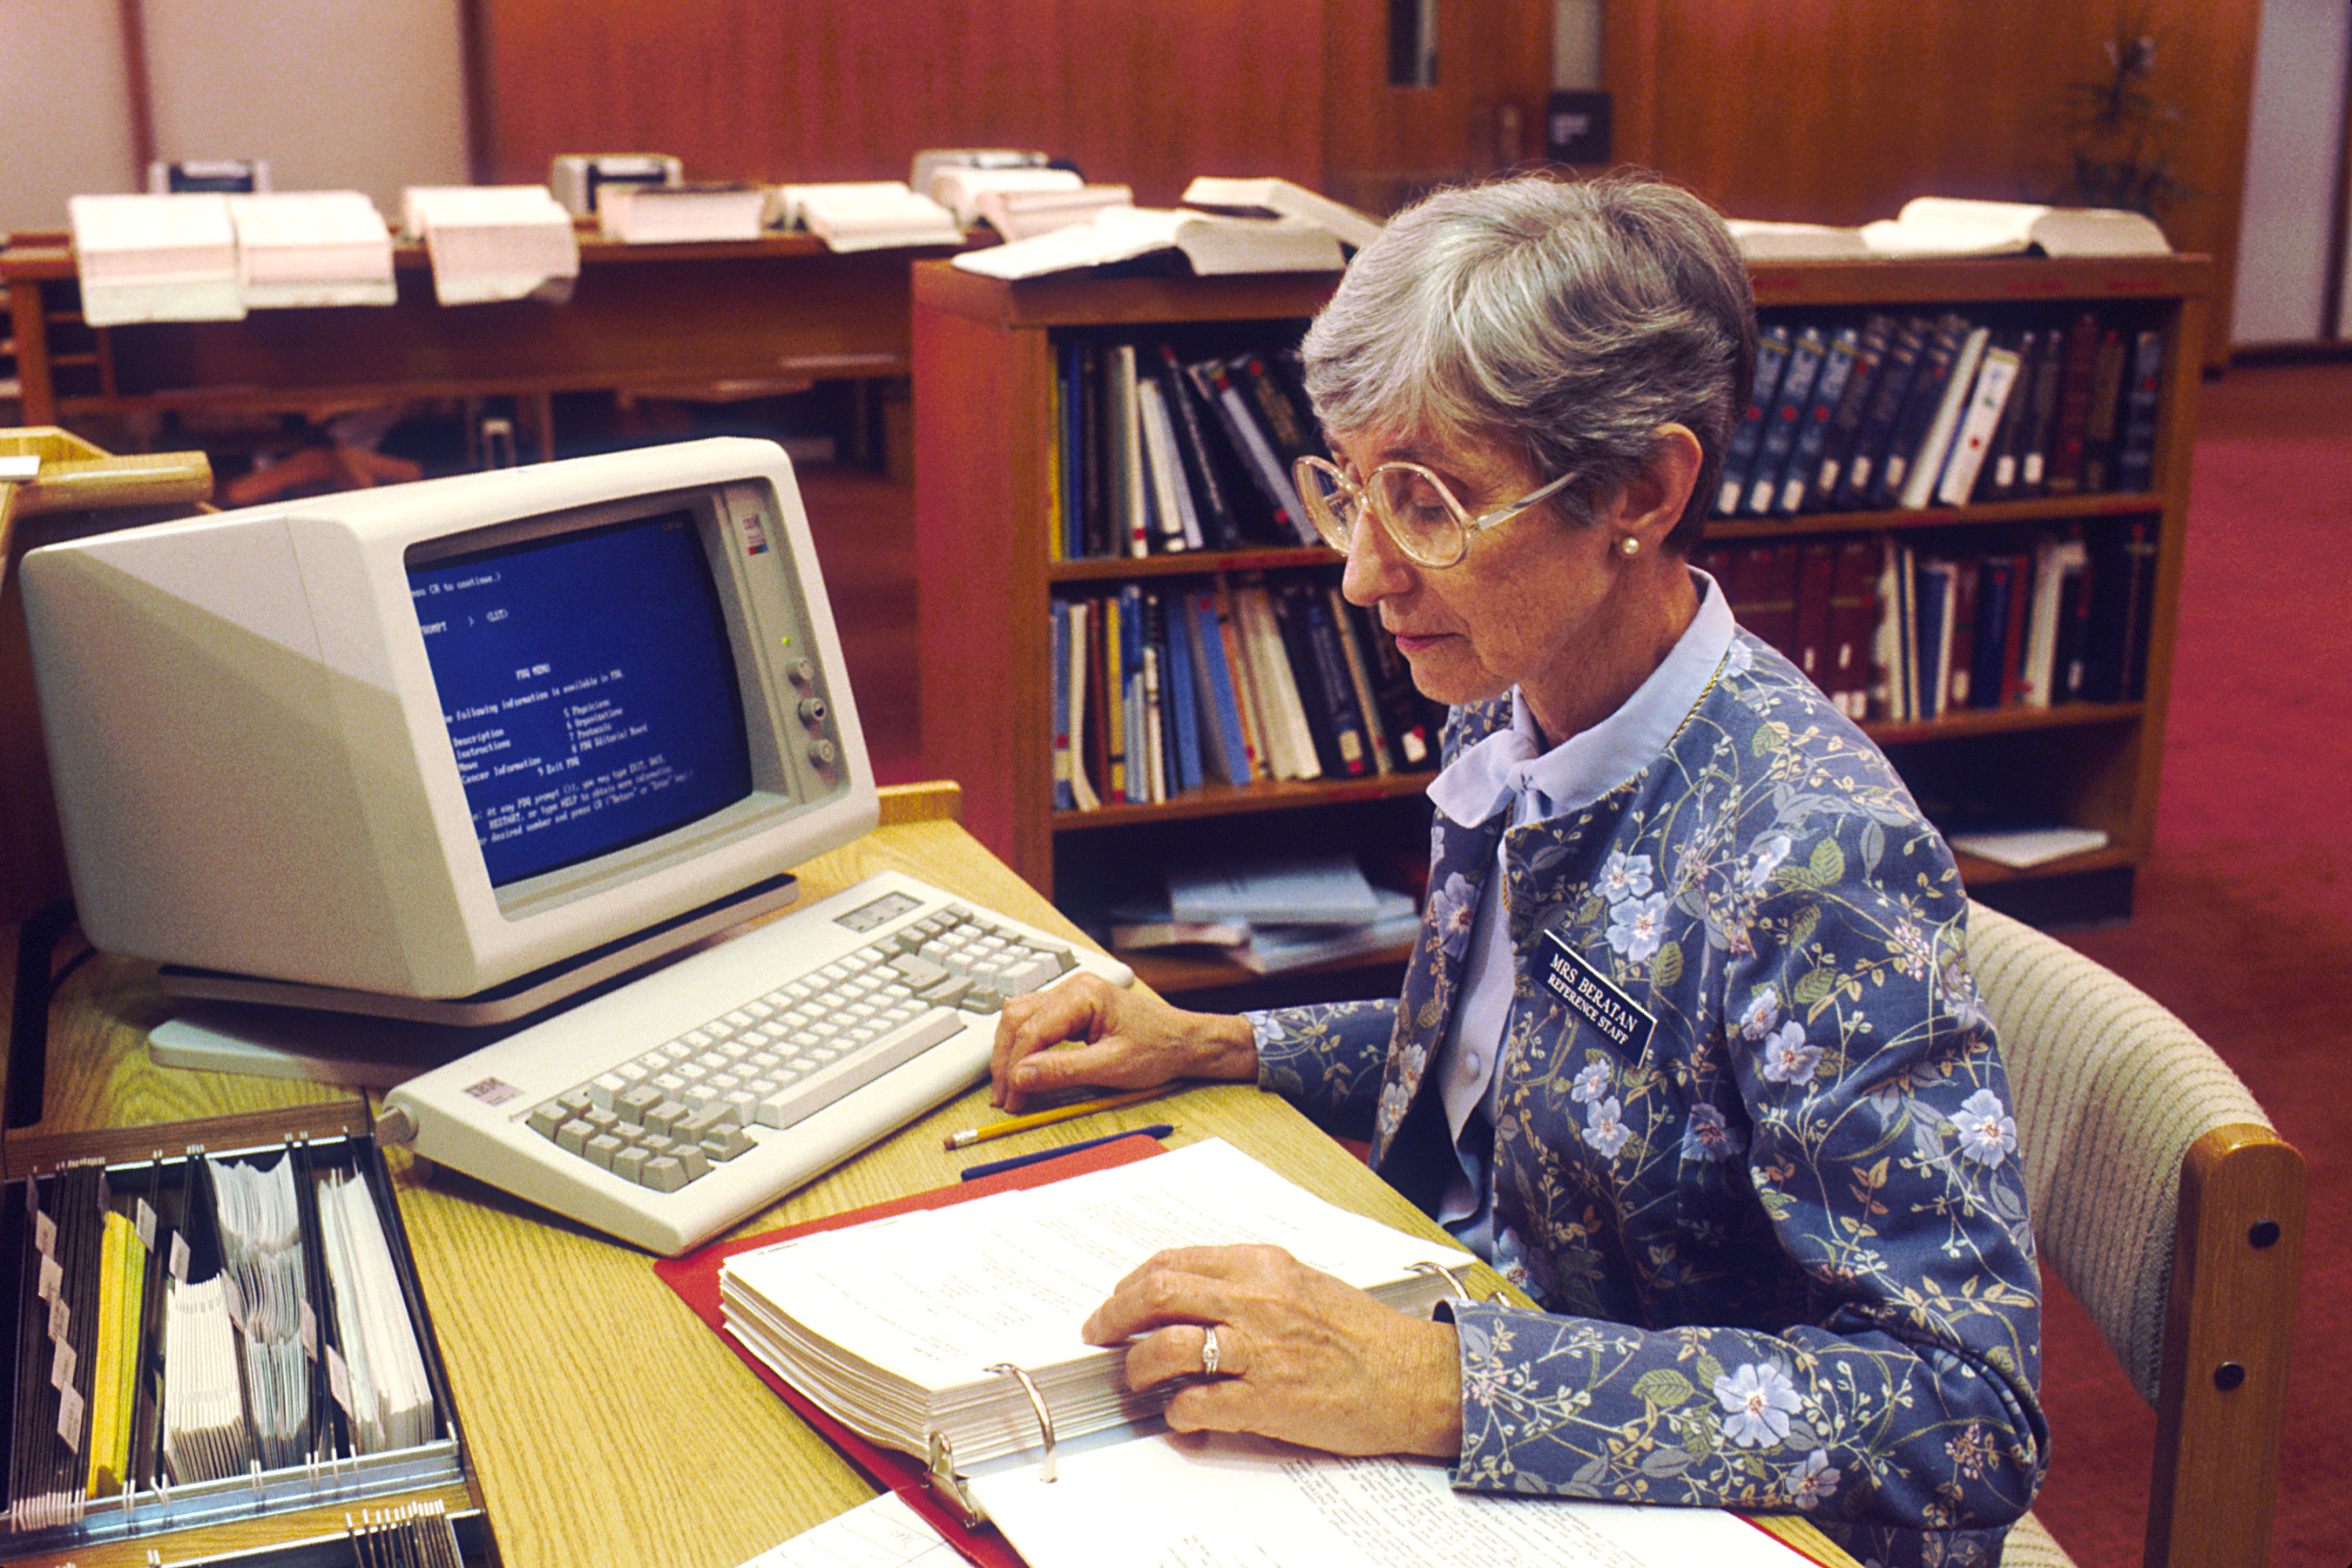 A librarian keeping a record of issued books.